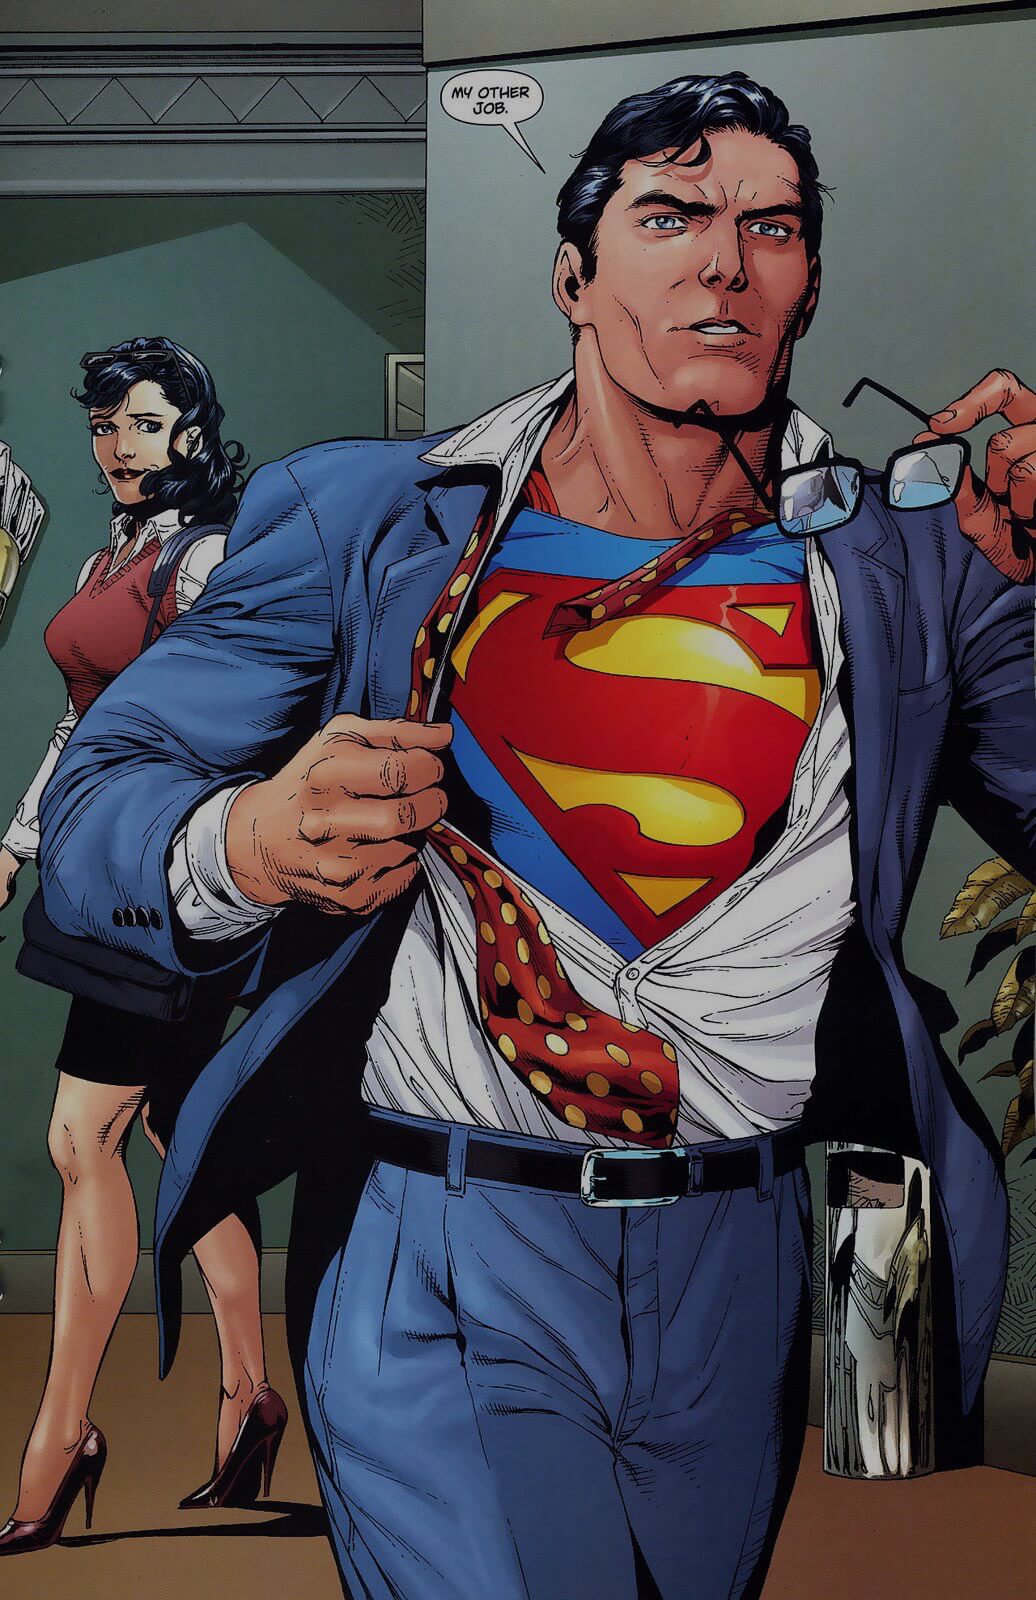 Clark Kent leaving The Daily Planet with a recently ripped shirt, displaying Superman's S